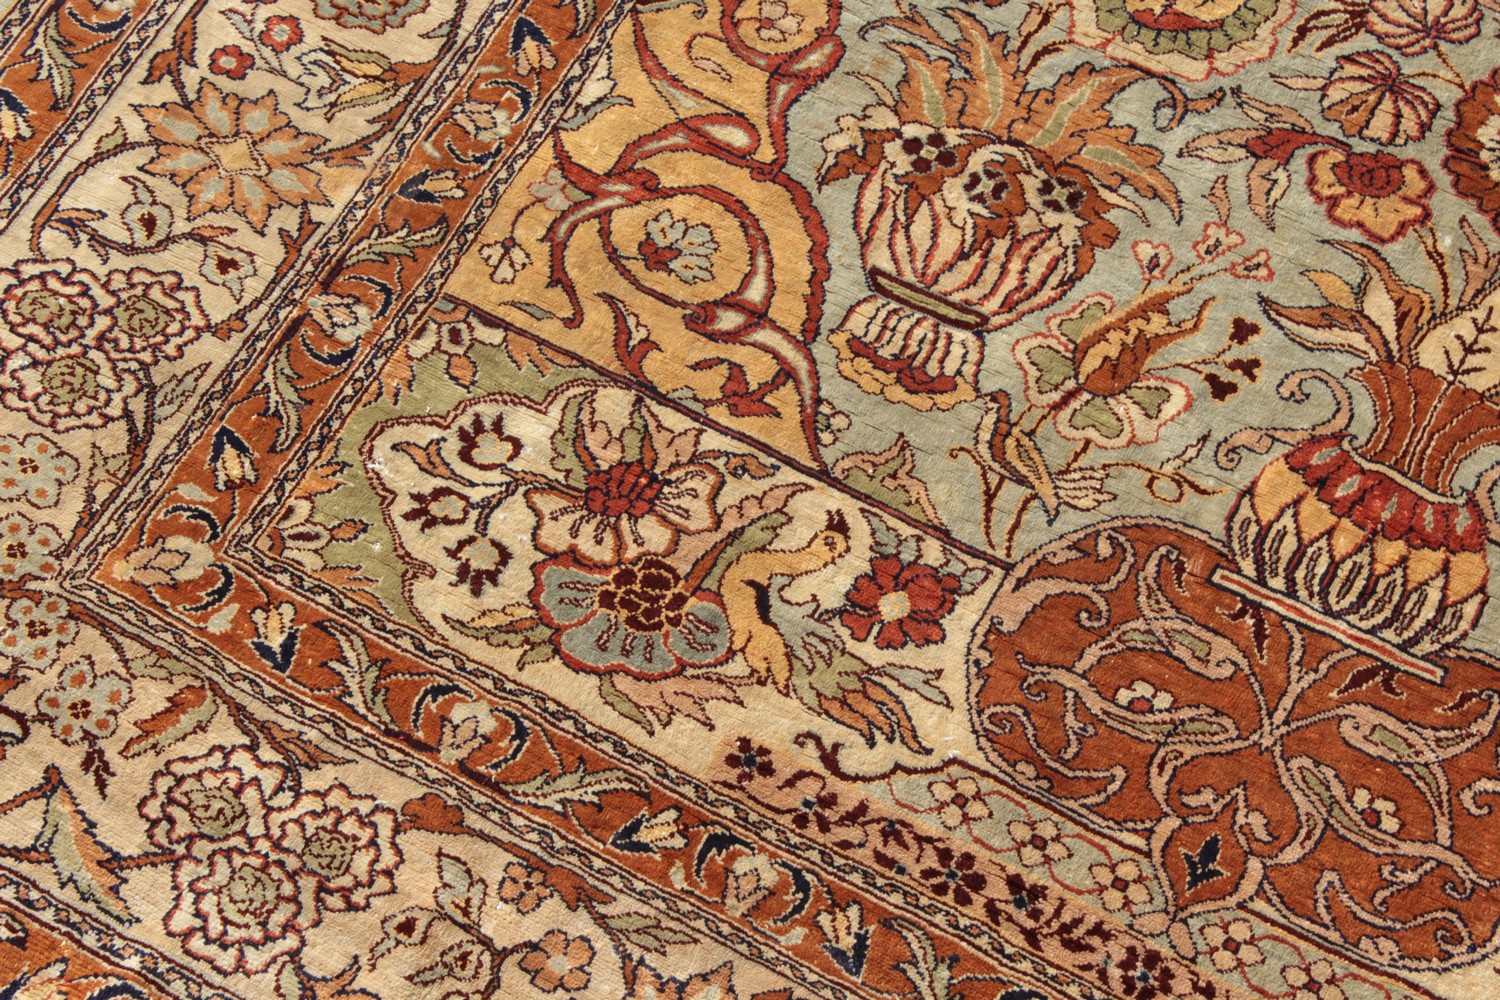 A FINE TURKISH SILK RUG with allover pattern of birds and flowers. 6ft 10ins x 4ft 3ins. - Image 2 of 17